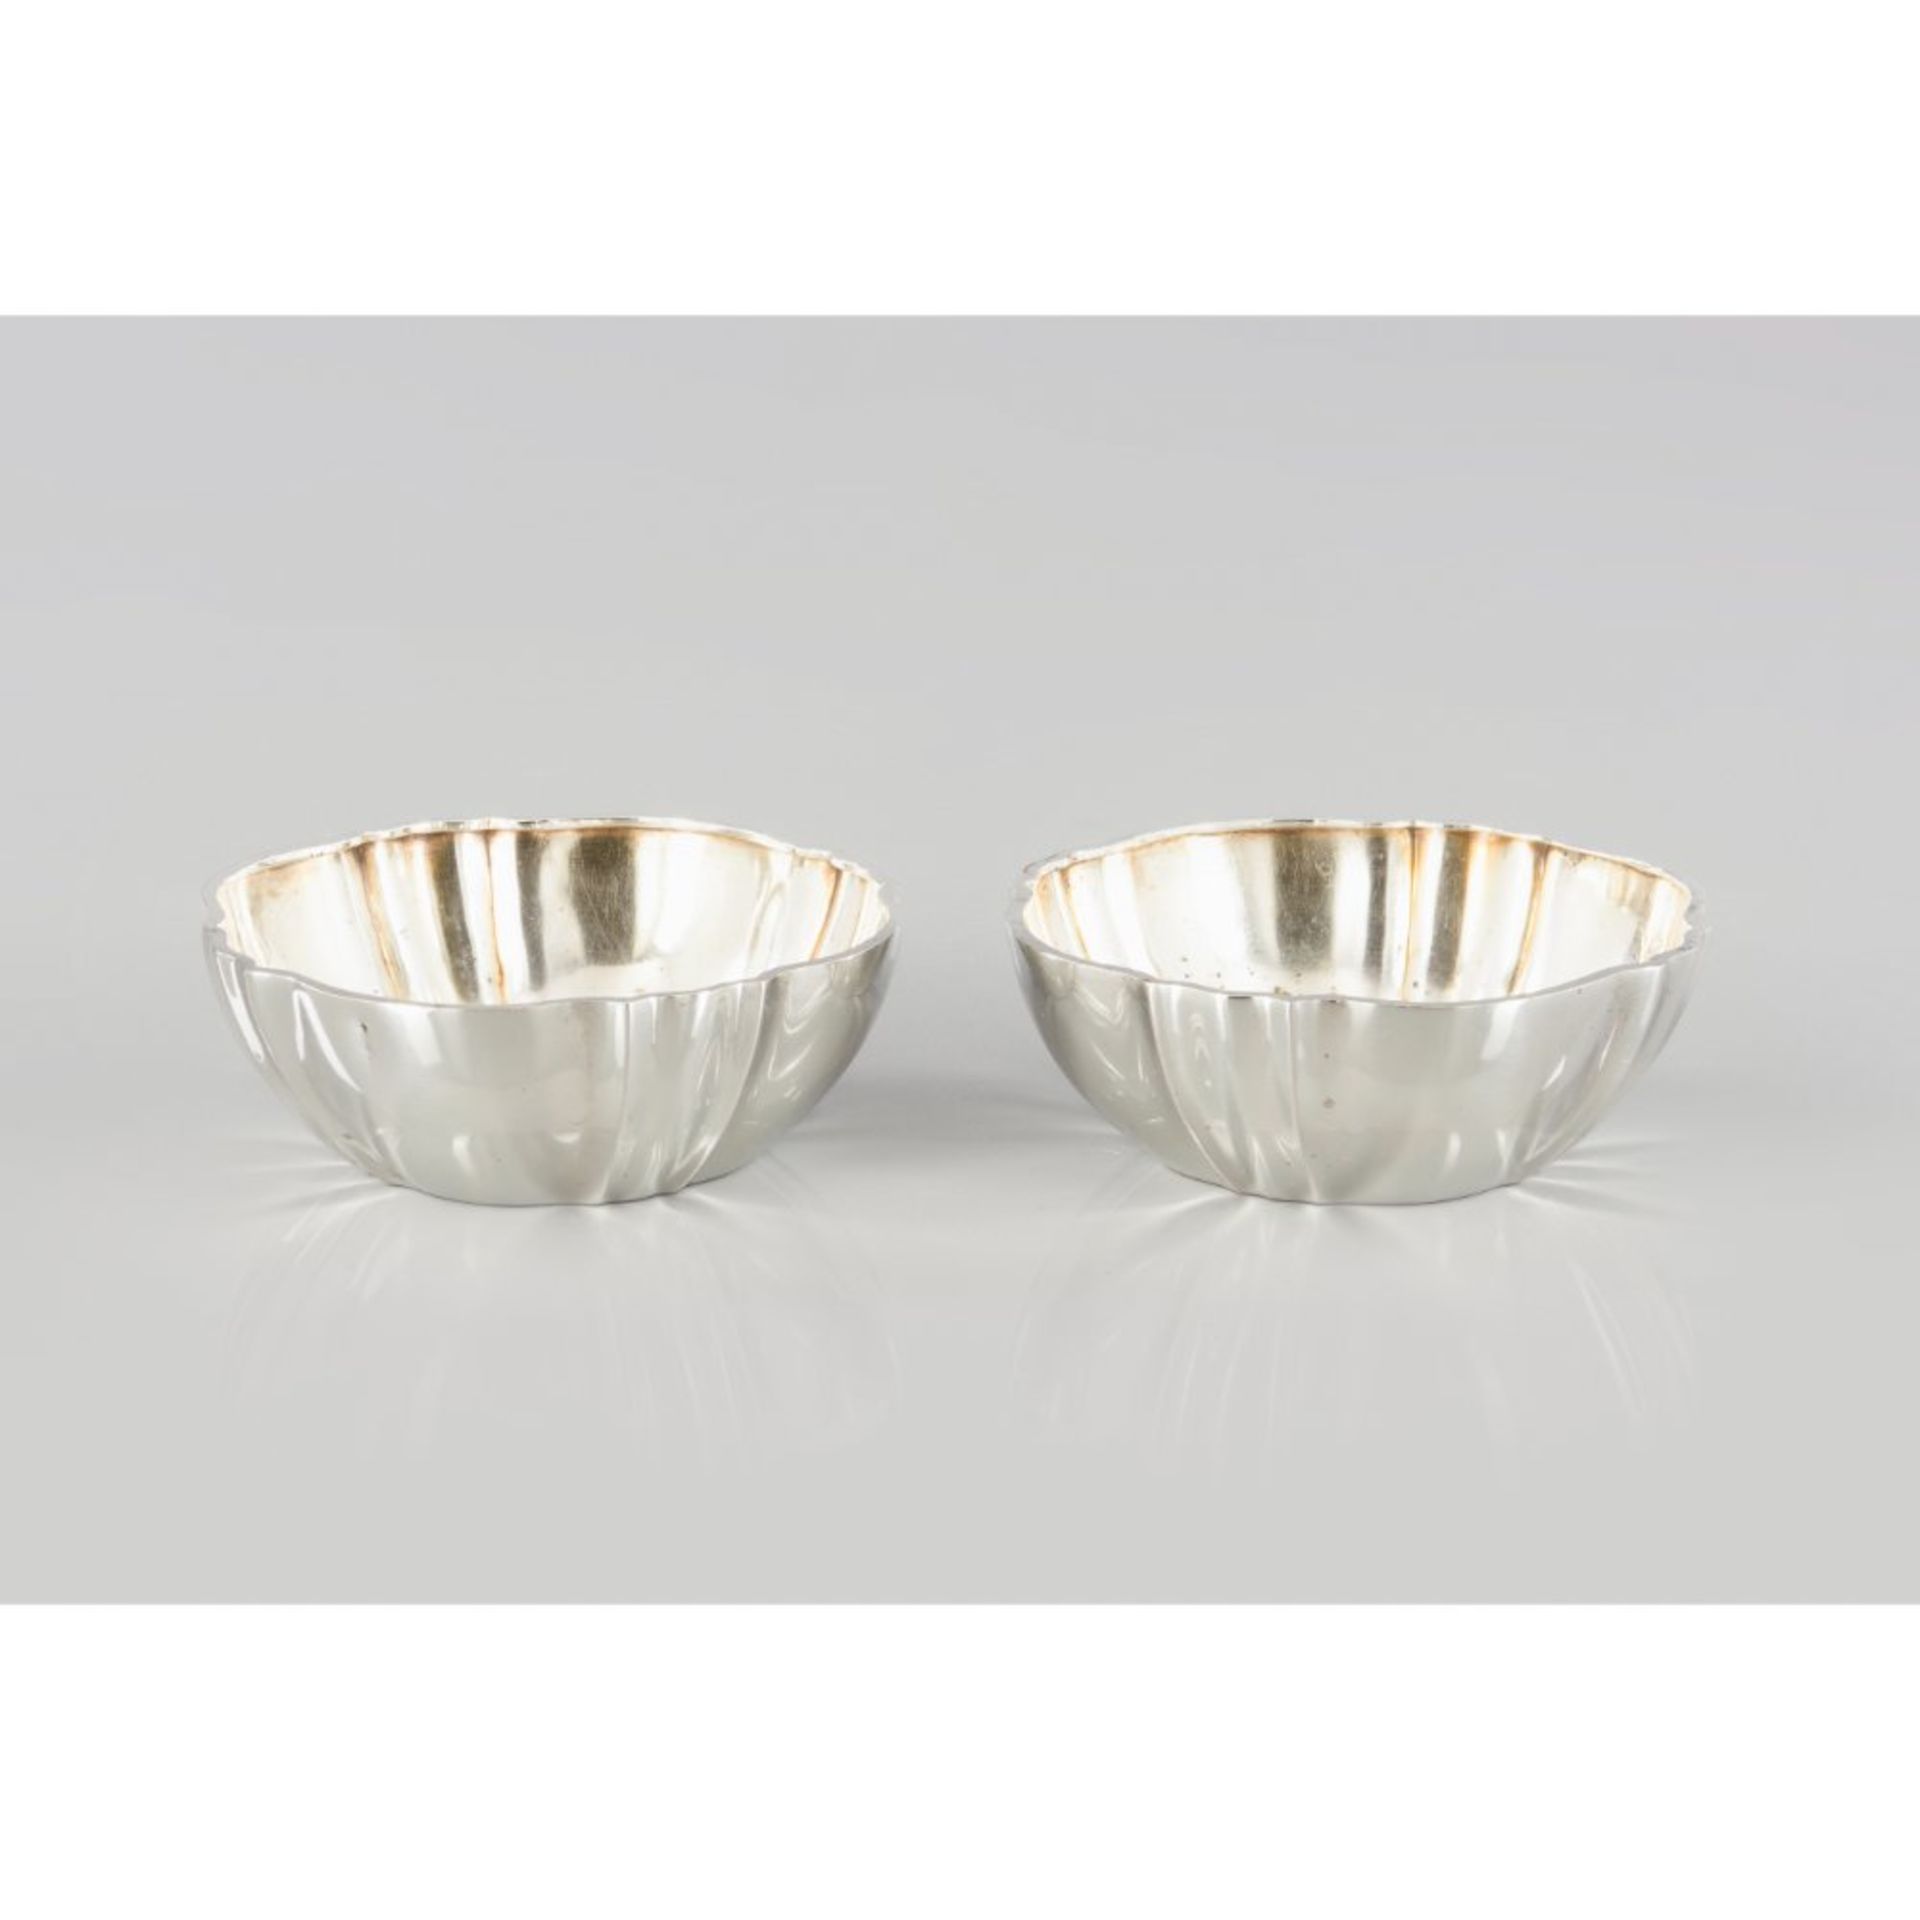 A pair of Finger Bowls